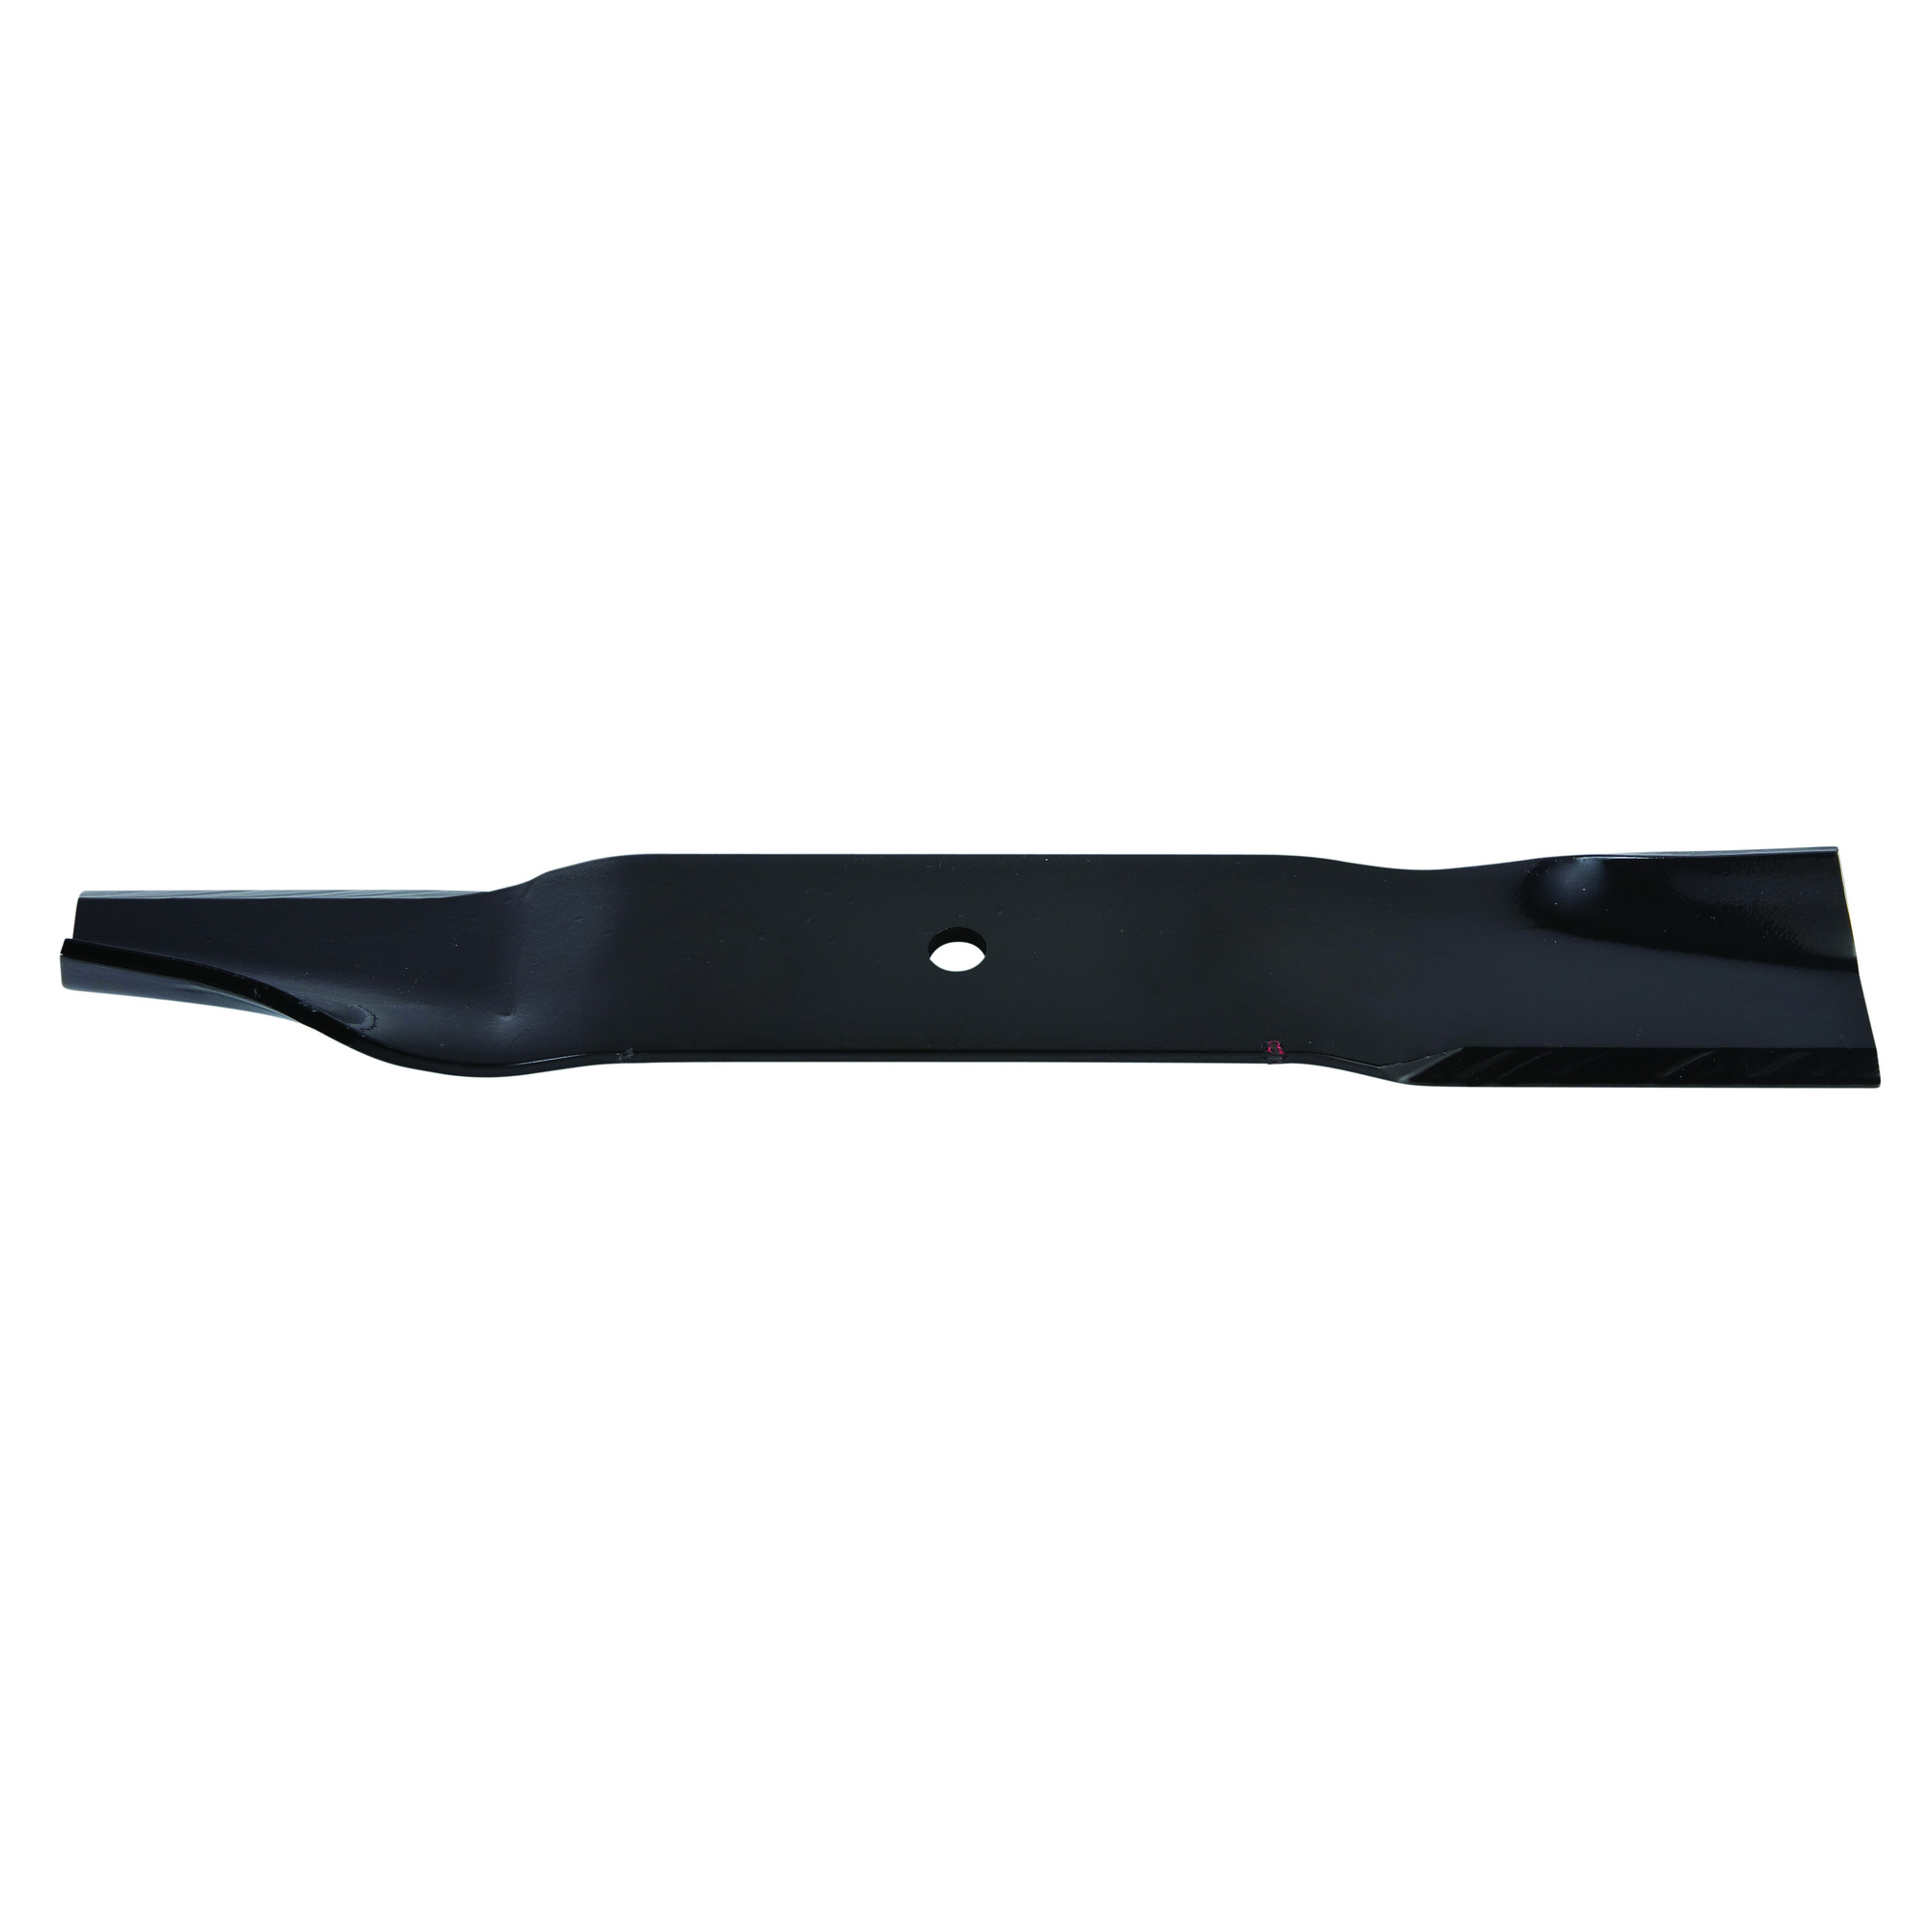 Oregon, Replacement Lawn Mower Blade, Length 16.938 in, Model 91-123